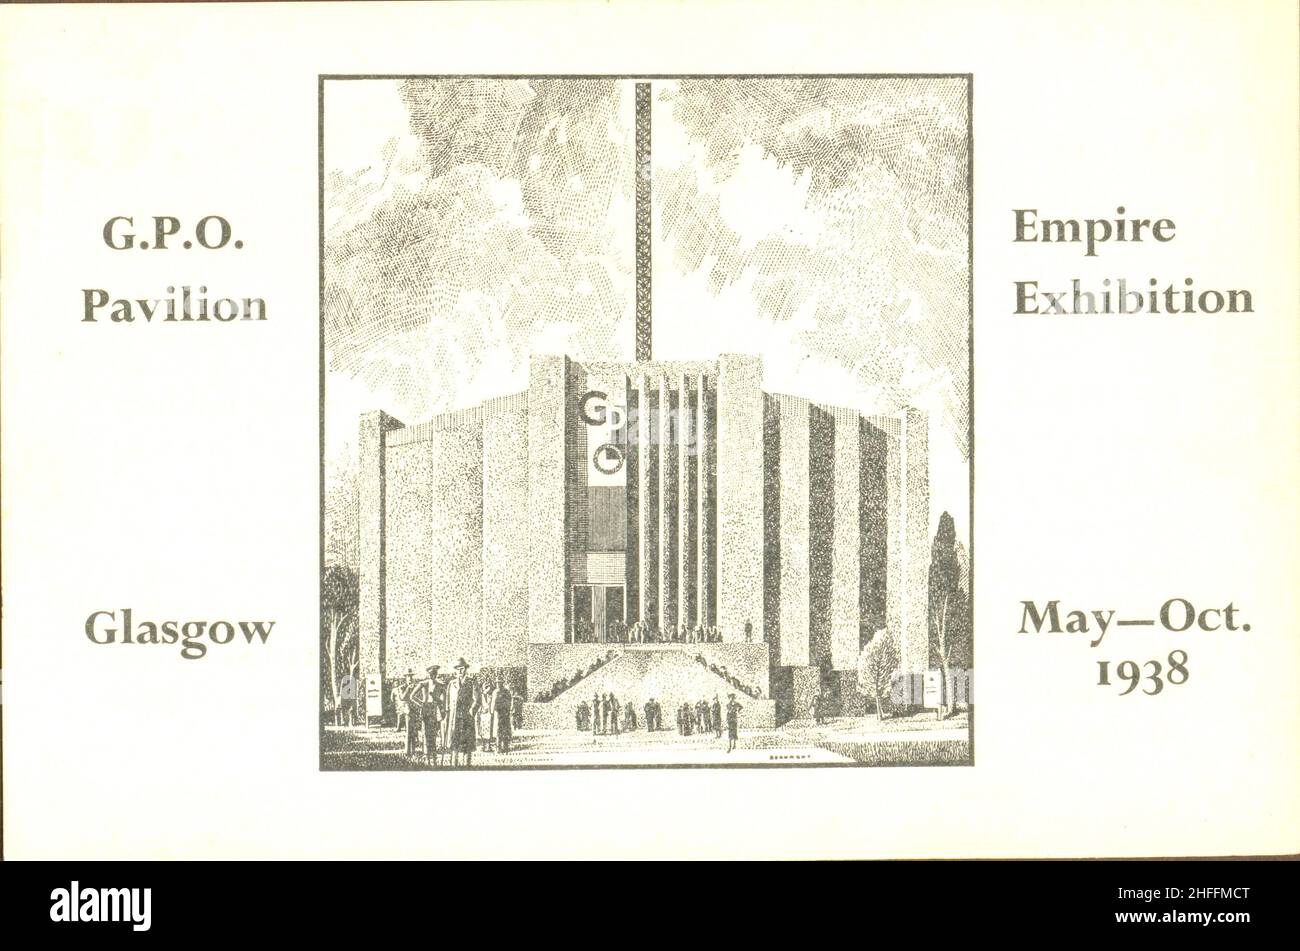 Advertising memento for the G.P.O. Pavilion, Empire Exhibition, Glasgow May-October 1938 Stock Photo